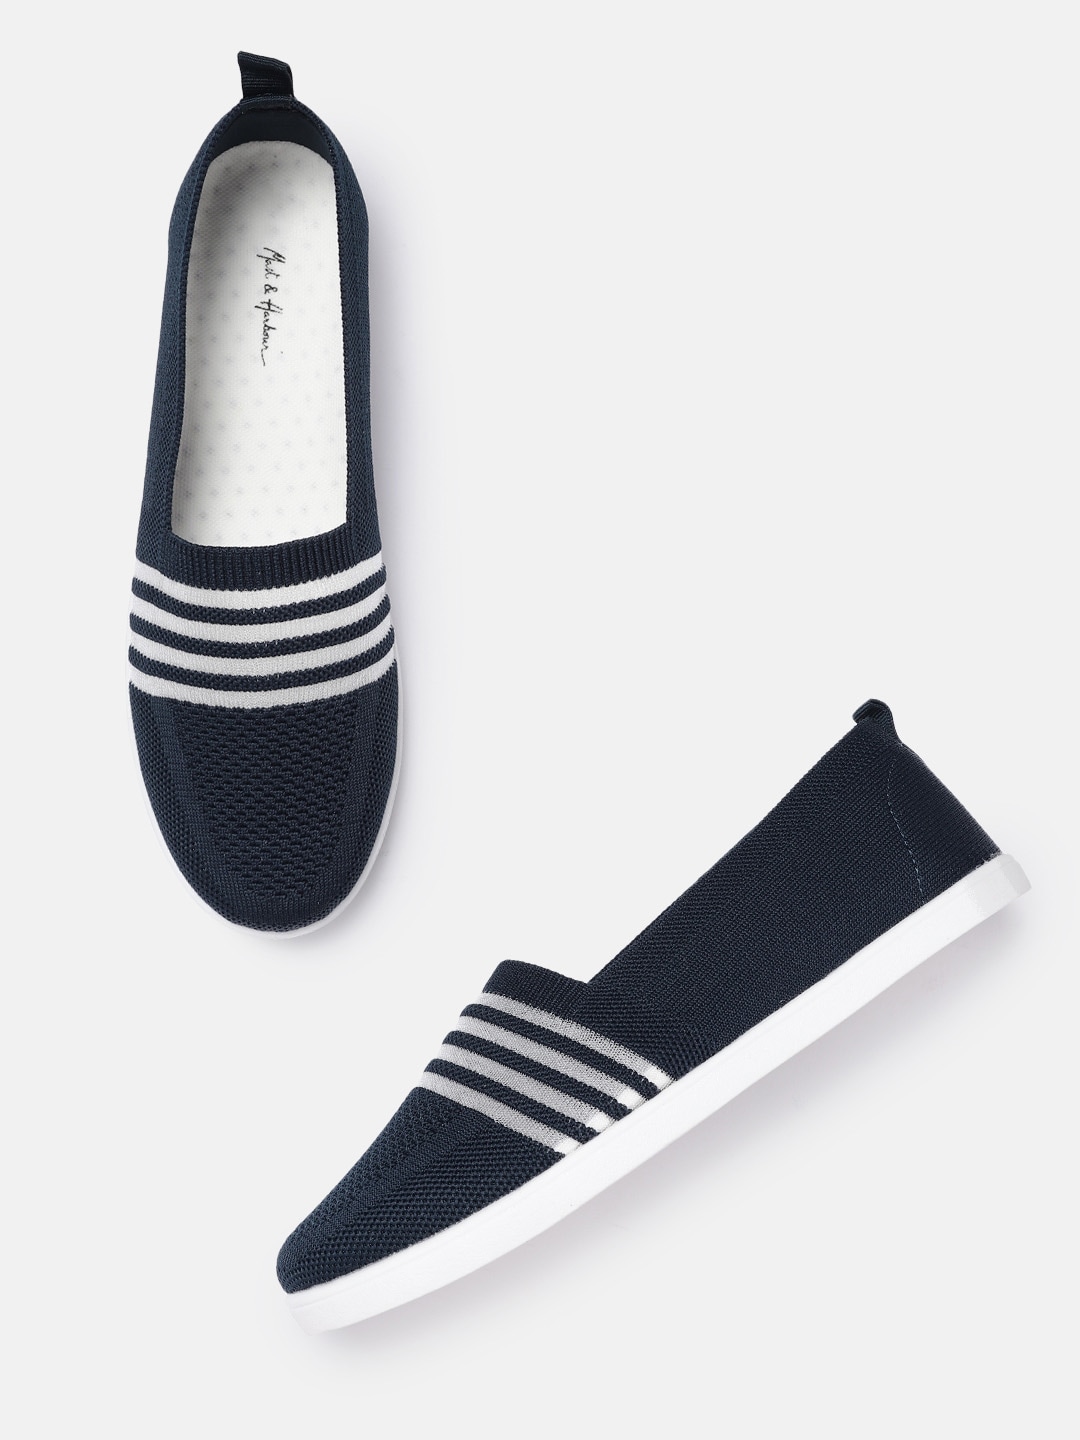 Mast & Harbour Women Navy Blue & White Striped Slip-On Sneakers Price in India